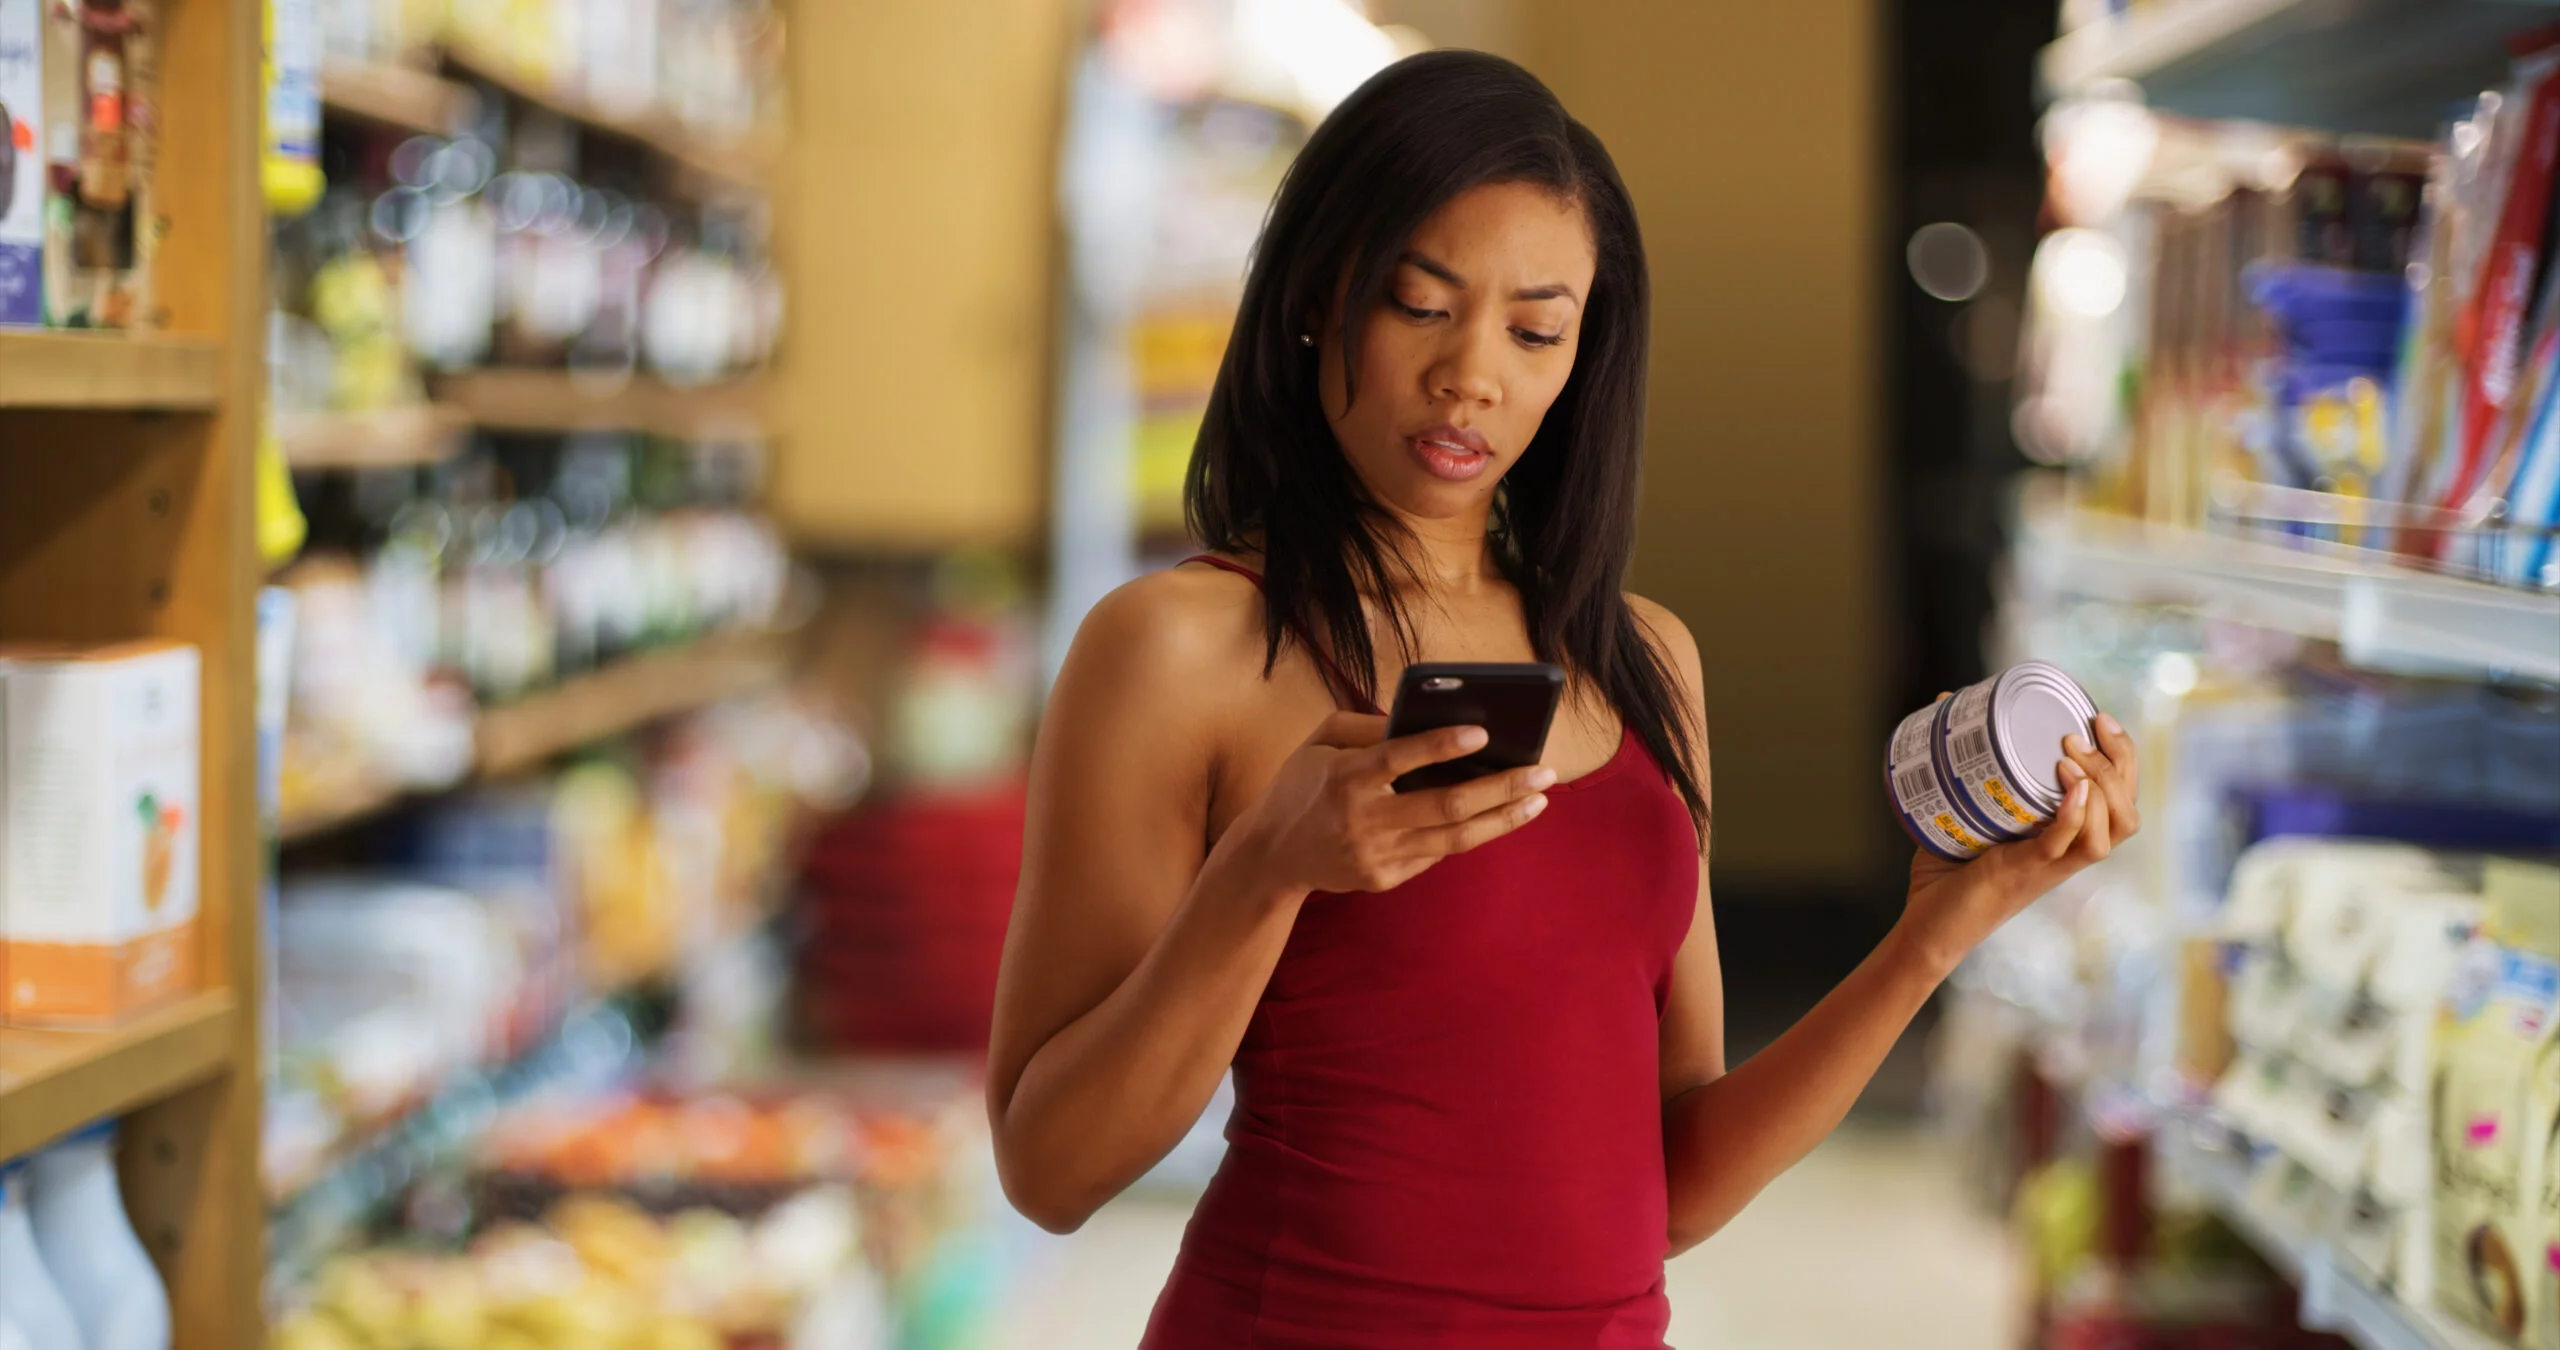 Black woman studies her phone at the grocery store